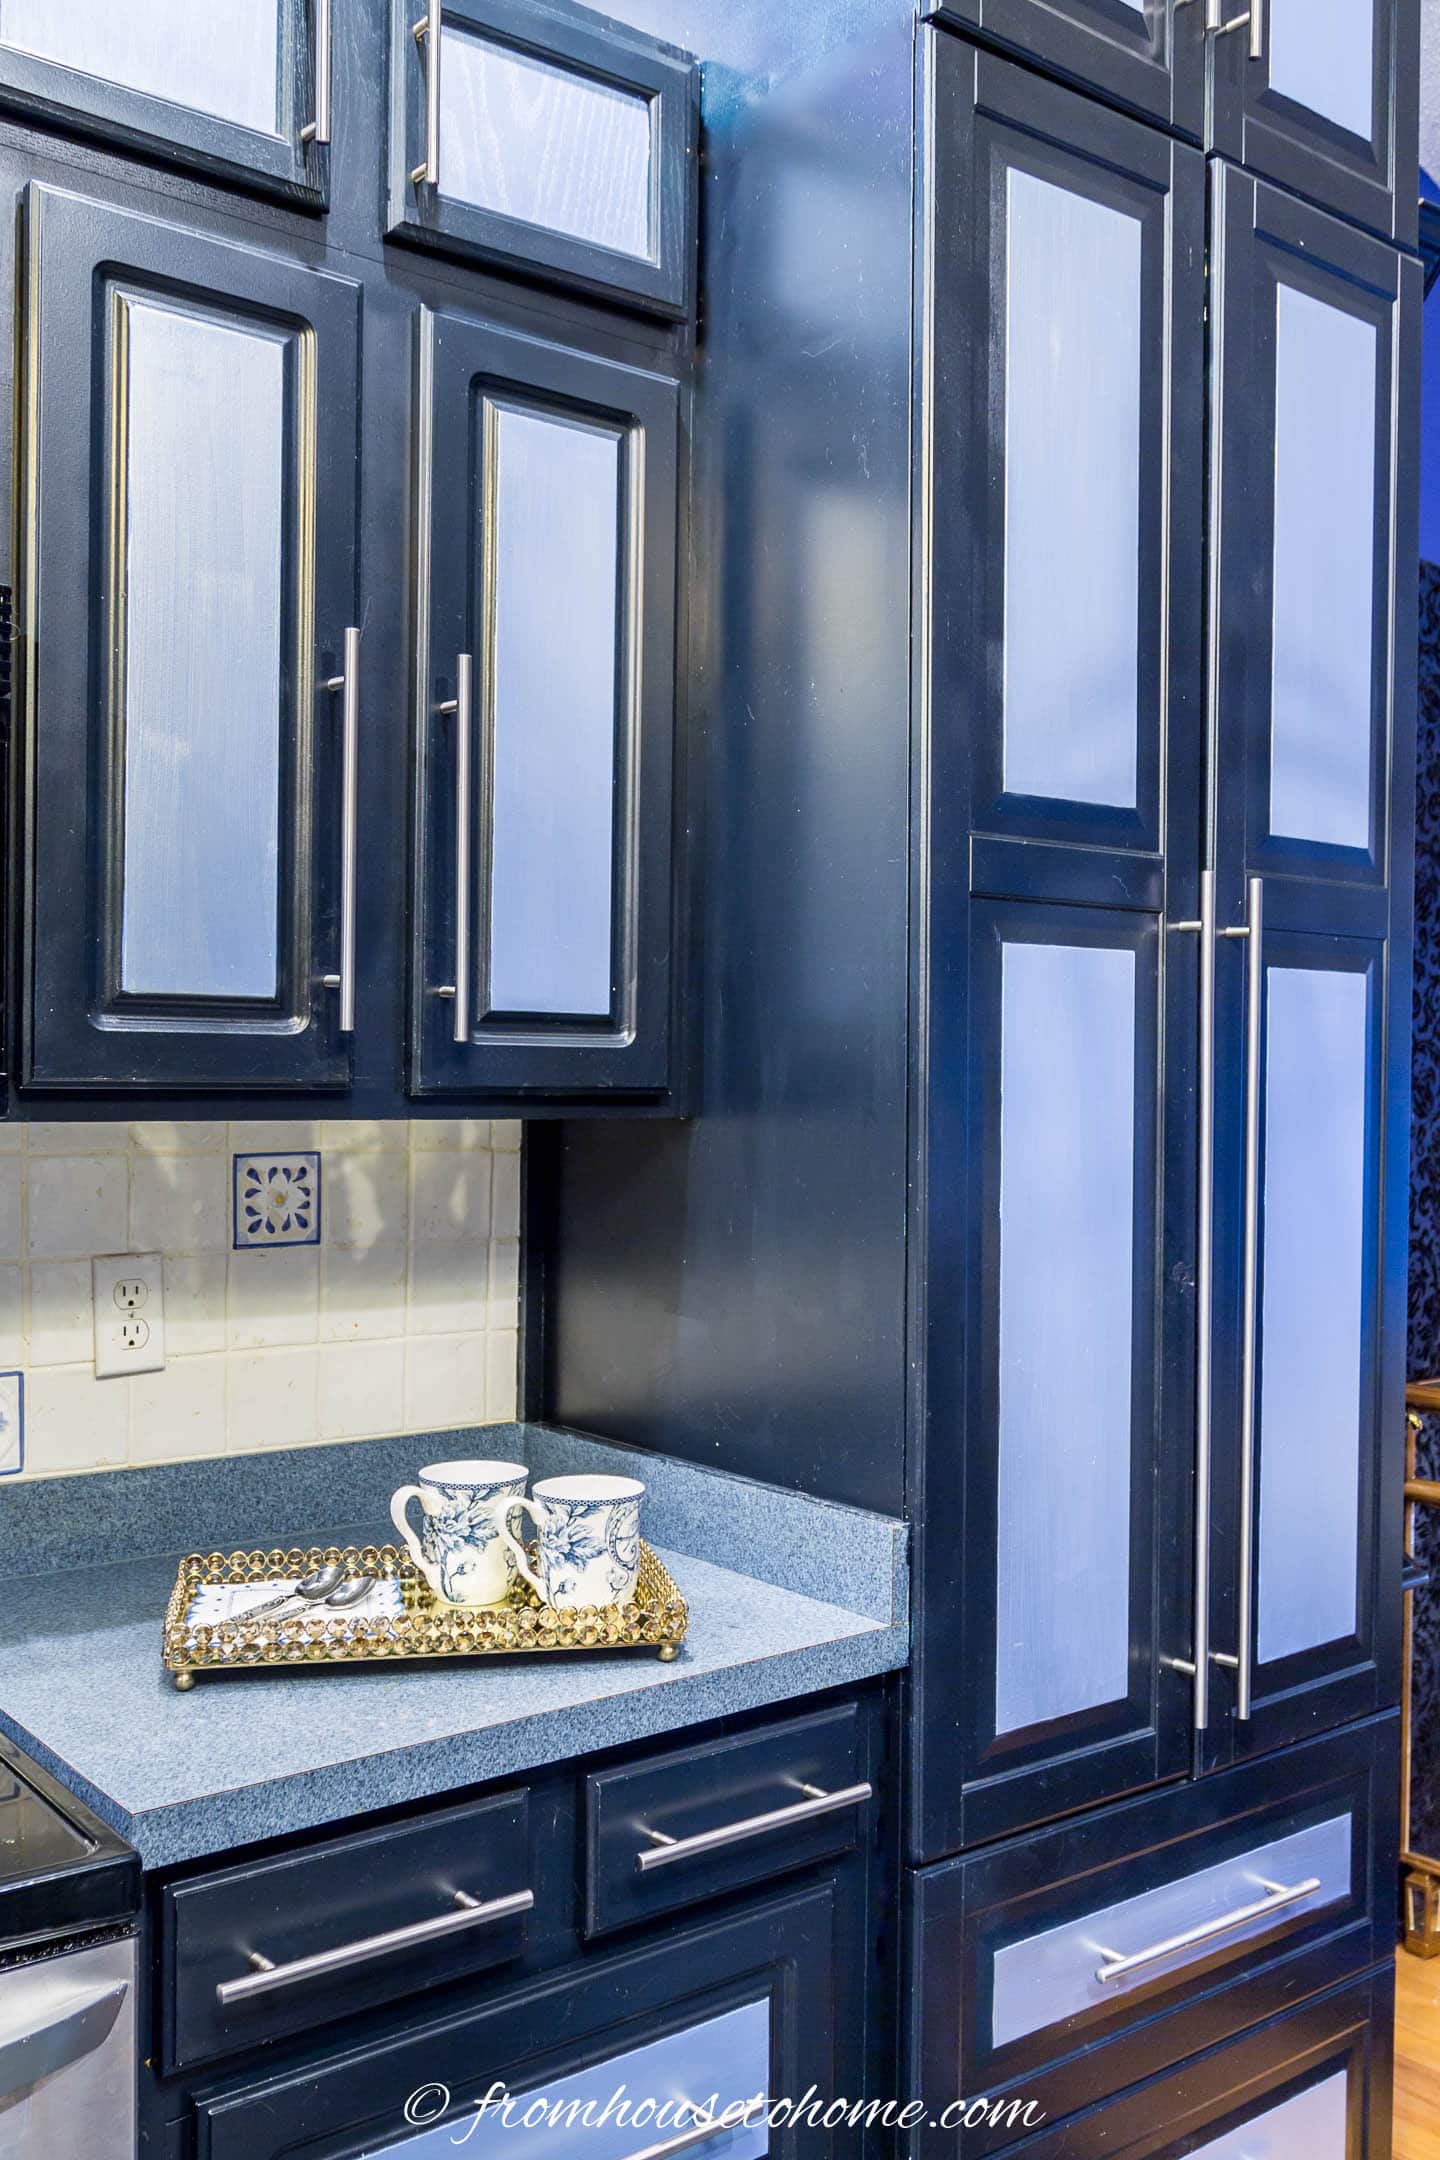 kitchen cabinets painted with black and blue paint and silver glaze